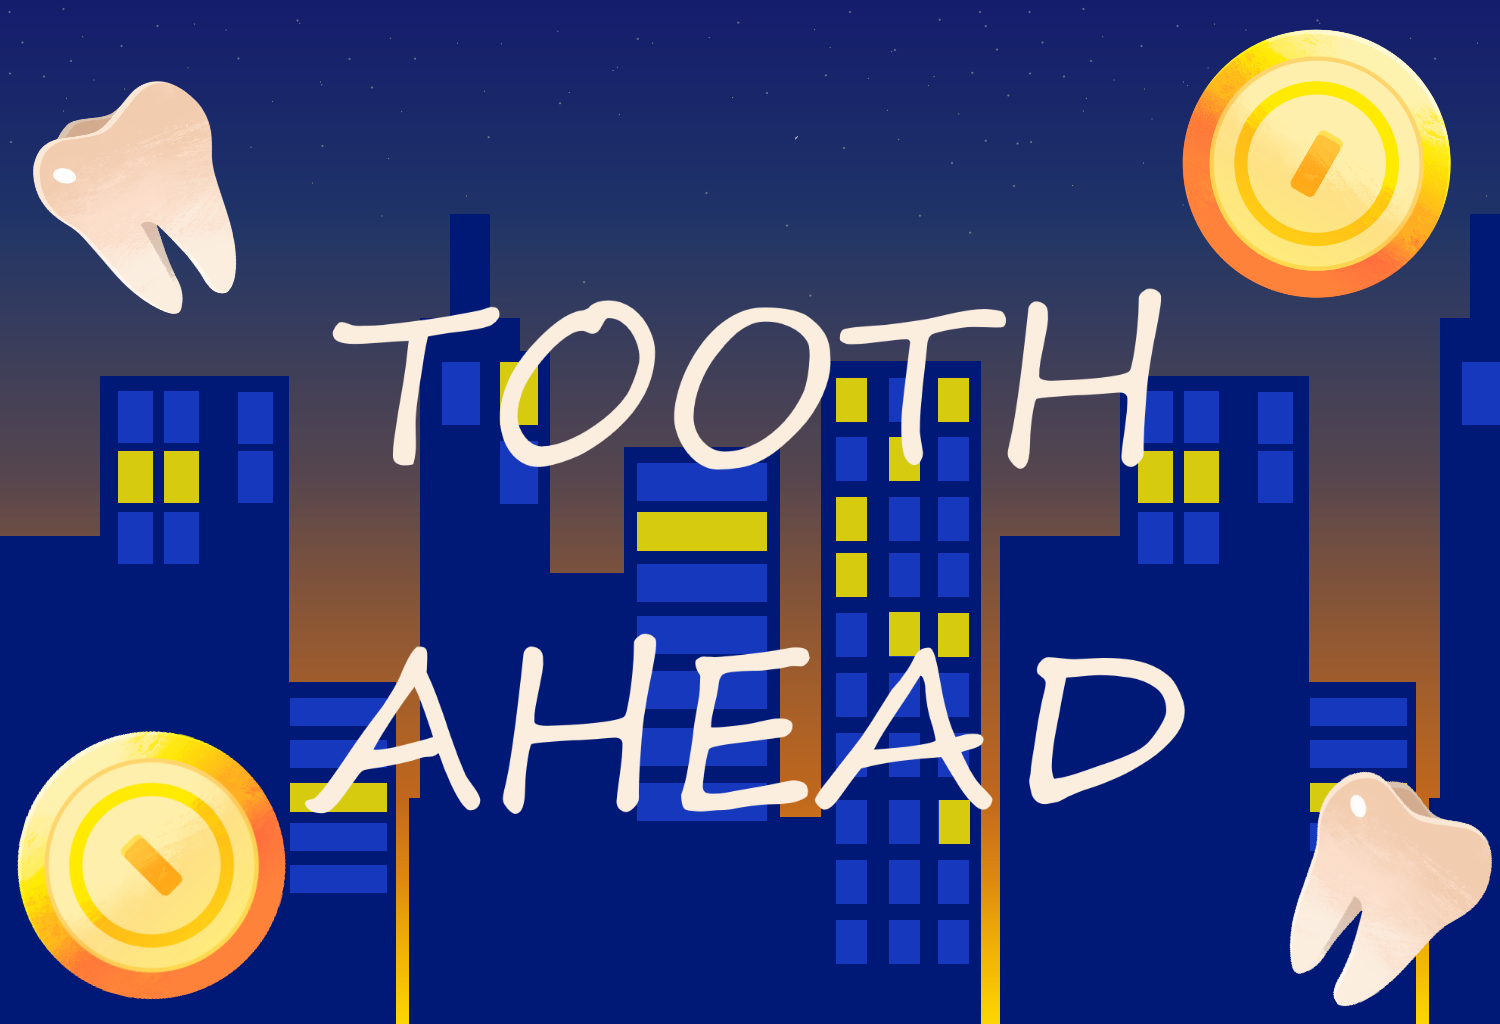 Tooth Ahead!